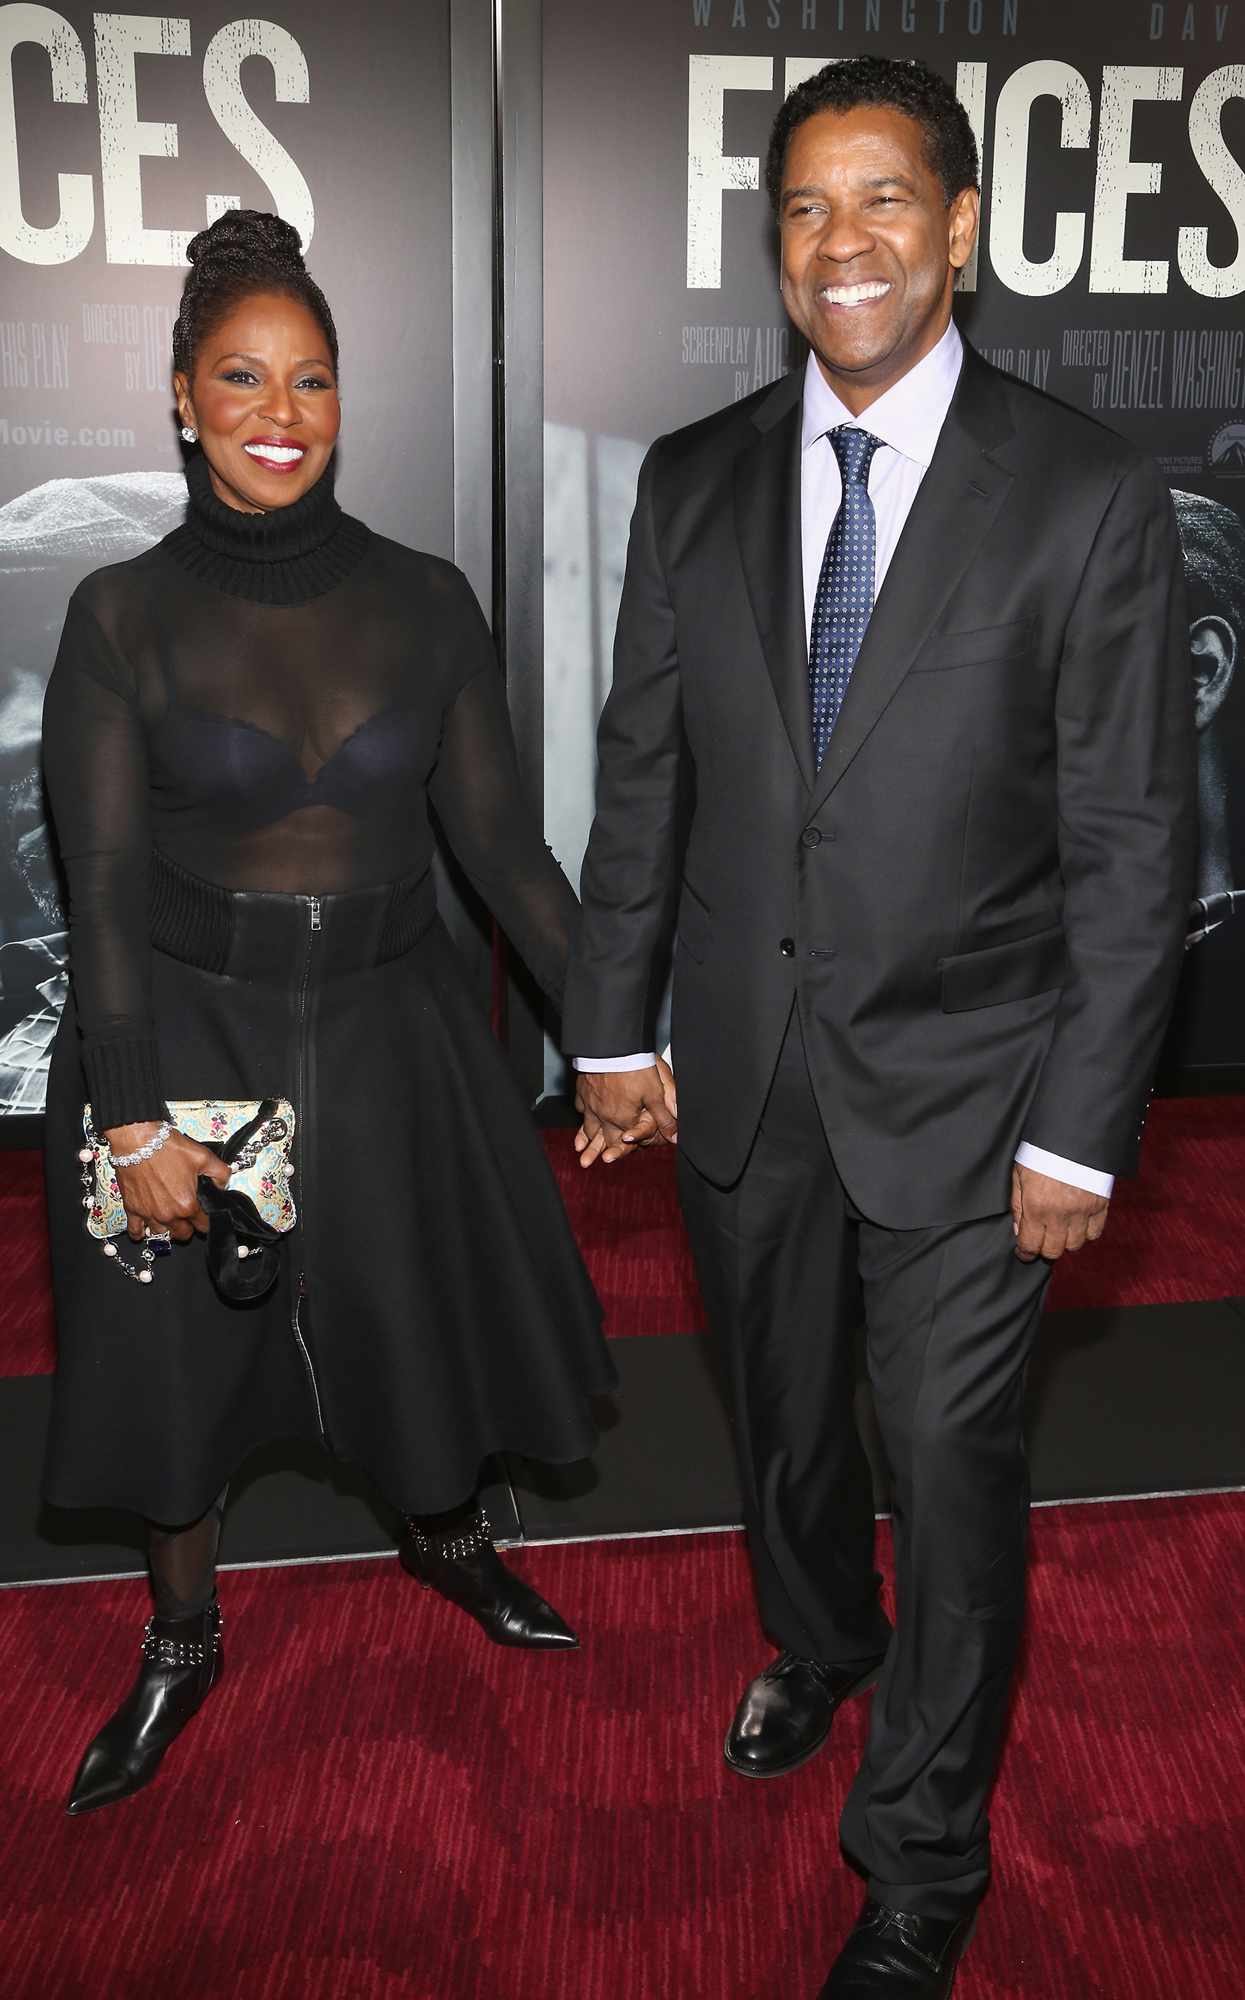 Pauletta Washington and Denzel Washington attend the New York special screening of "Fences" presented by Paramount Pictures on December 19, 2016 in New York City